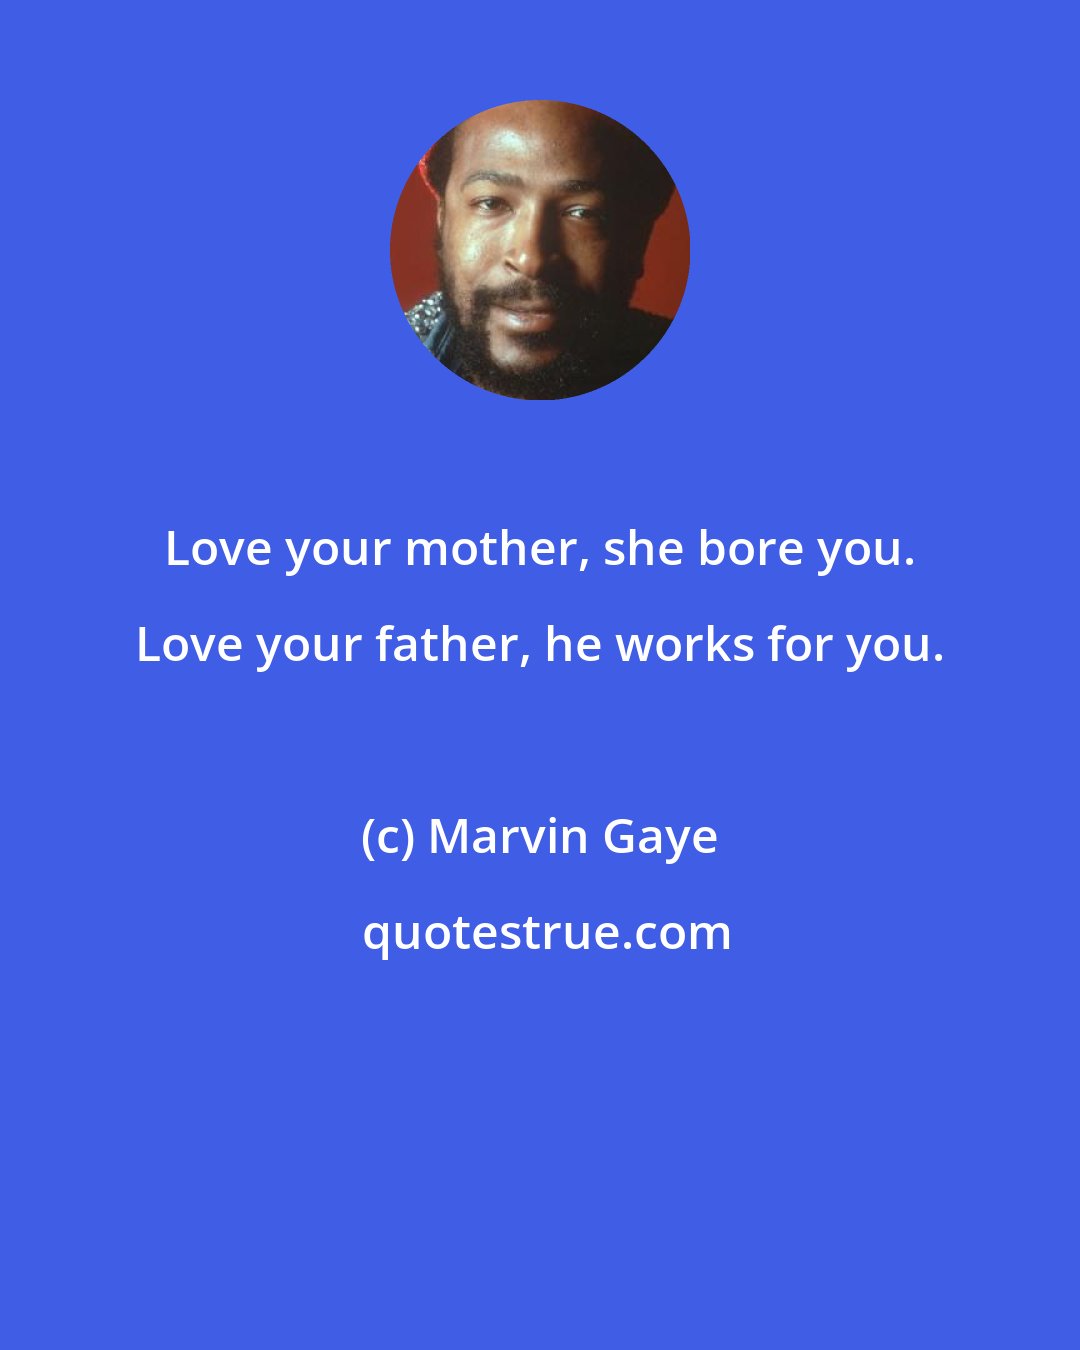 Marvin Gaye: Love your mother, she bore you. Love your father, he works for you.